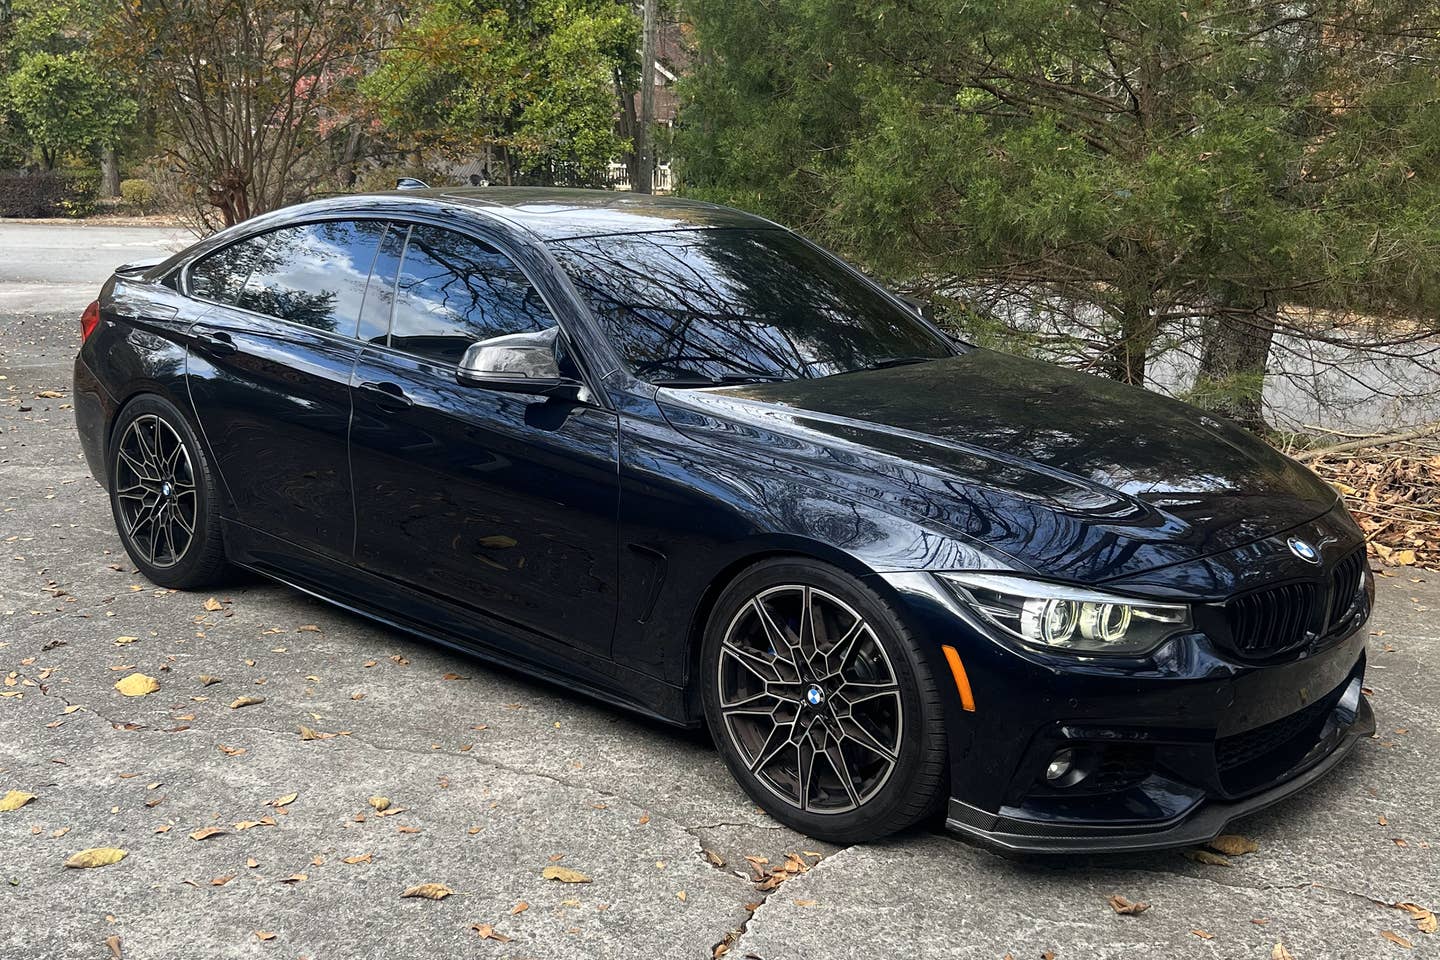 Eric Powell's 2018 BMW 440i, now safely back in his driveway.